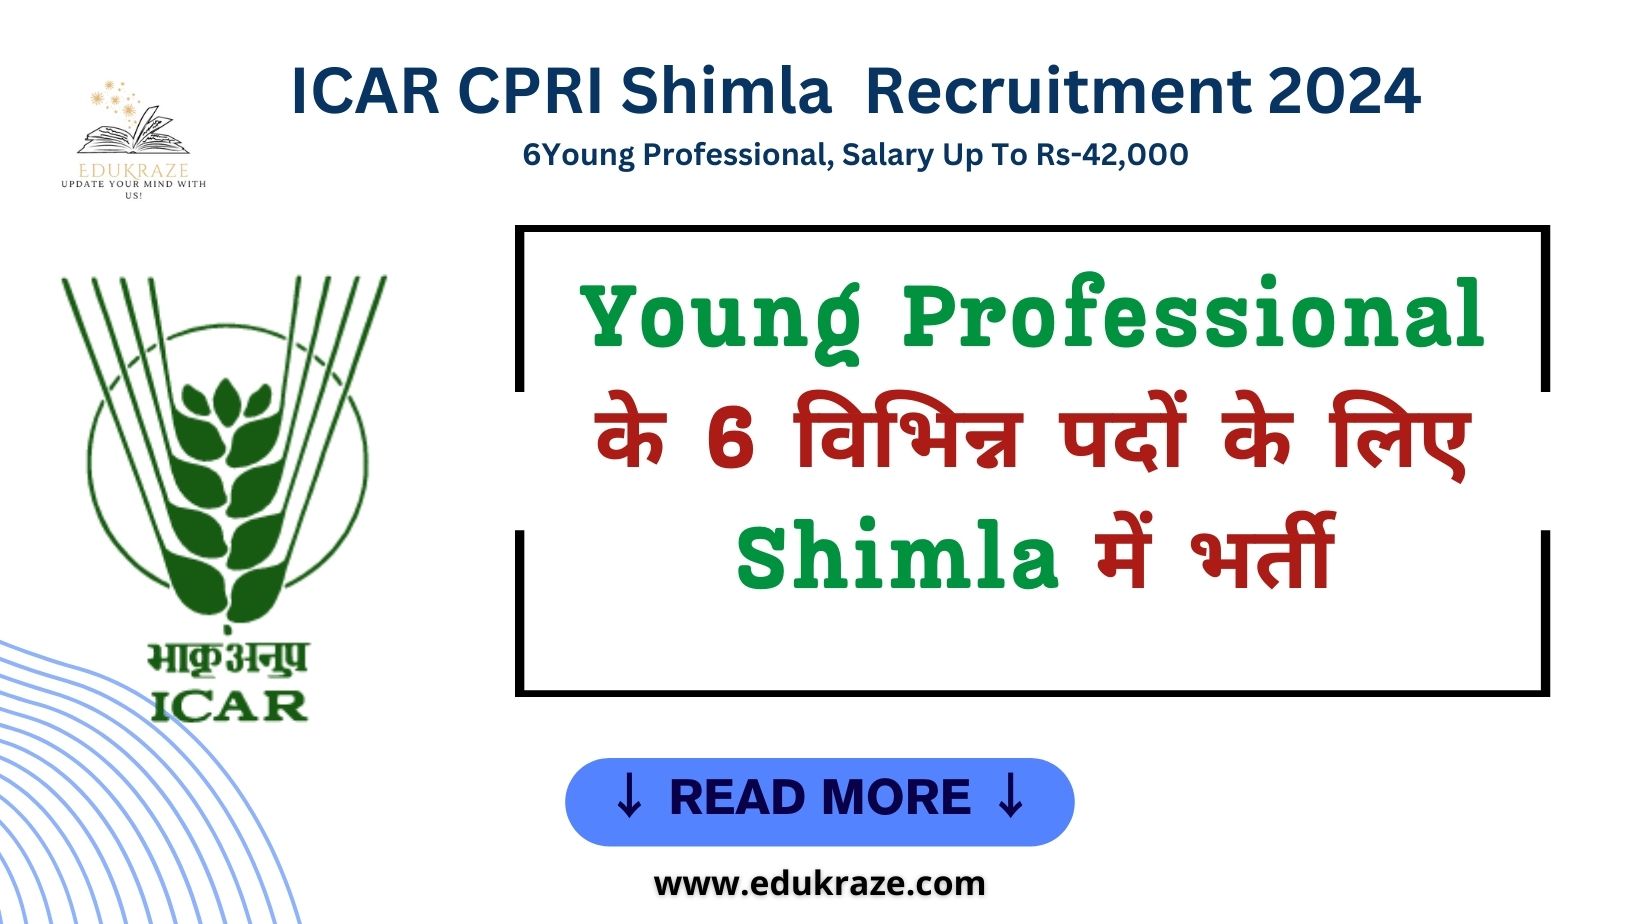 Young Professional Recruitment Out At ICAR CPRI Shimla